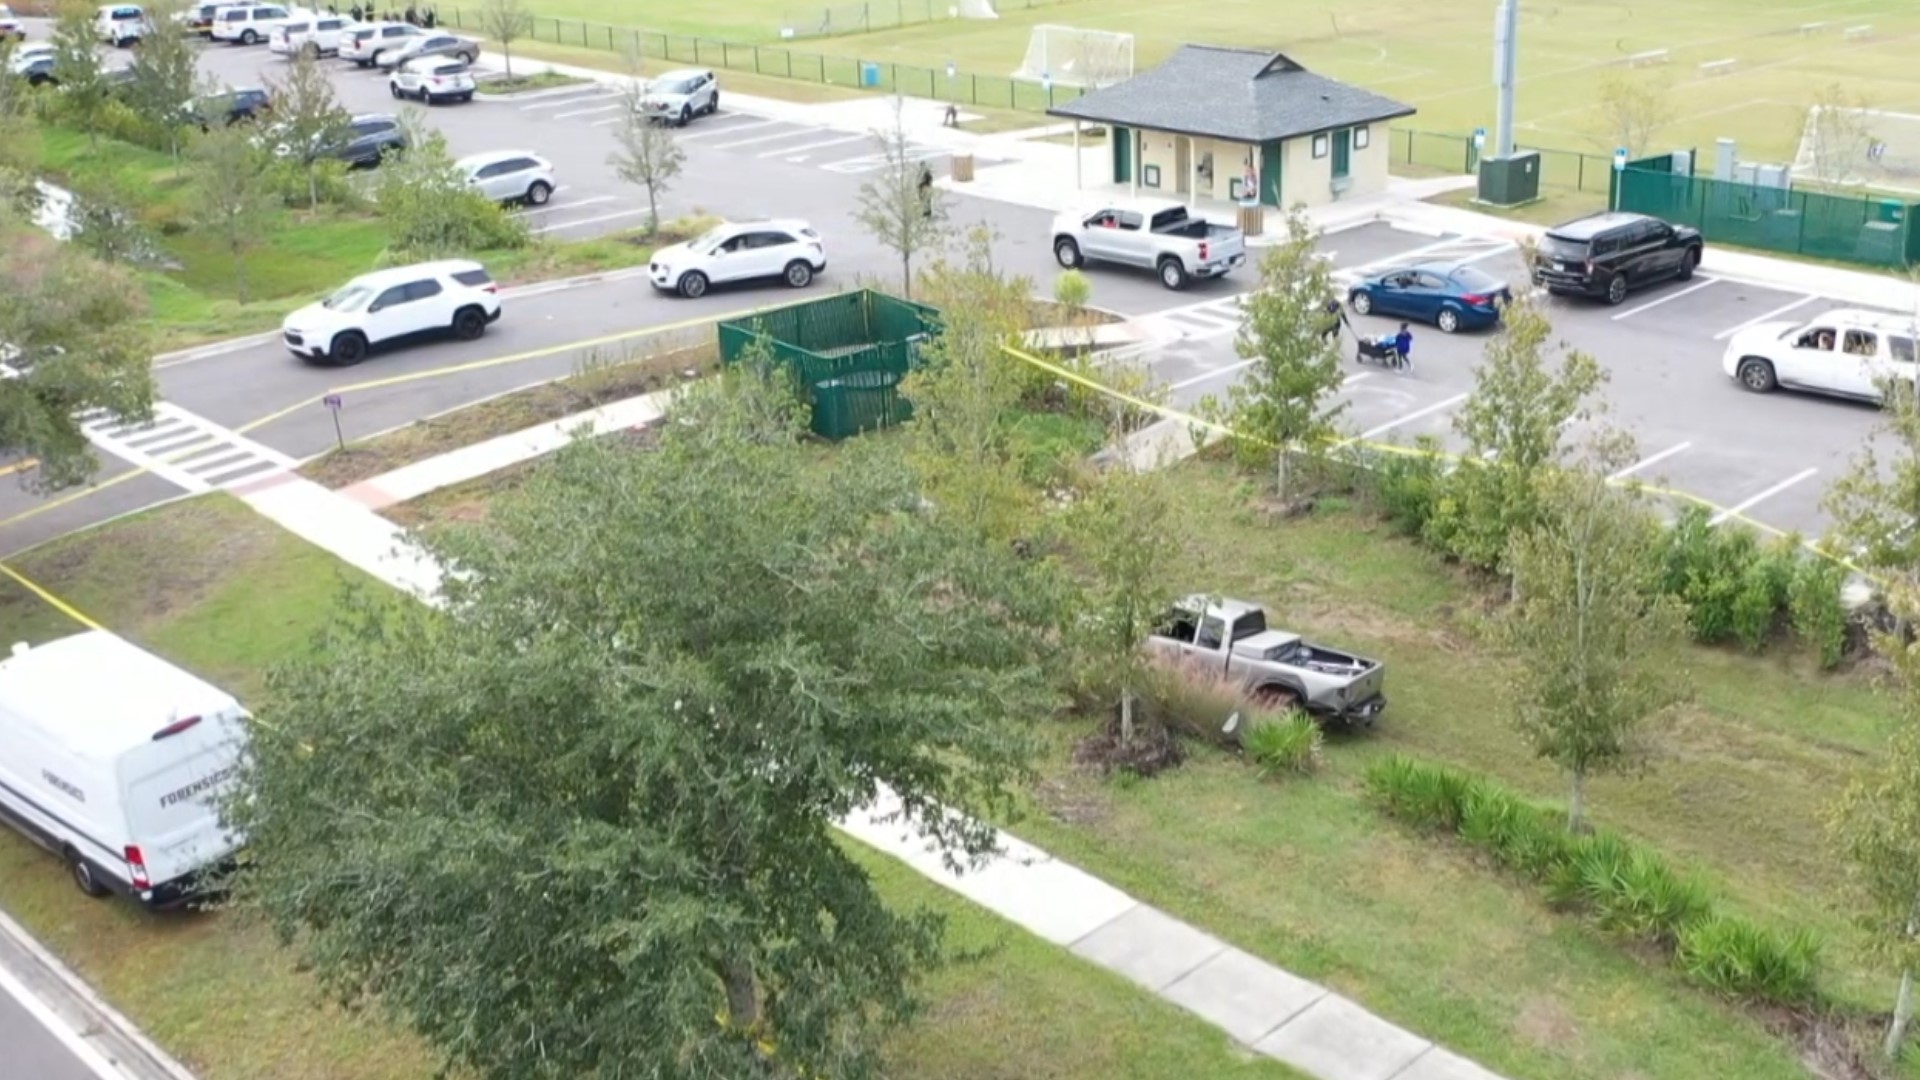 The St. Johns County Fire Rescue Department says one person was flown from the park in a helicopter. Police say the shooting was 'officer-involved.'